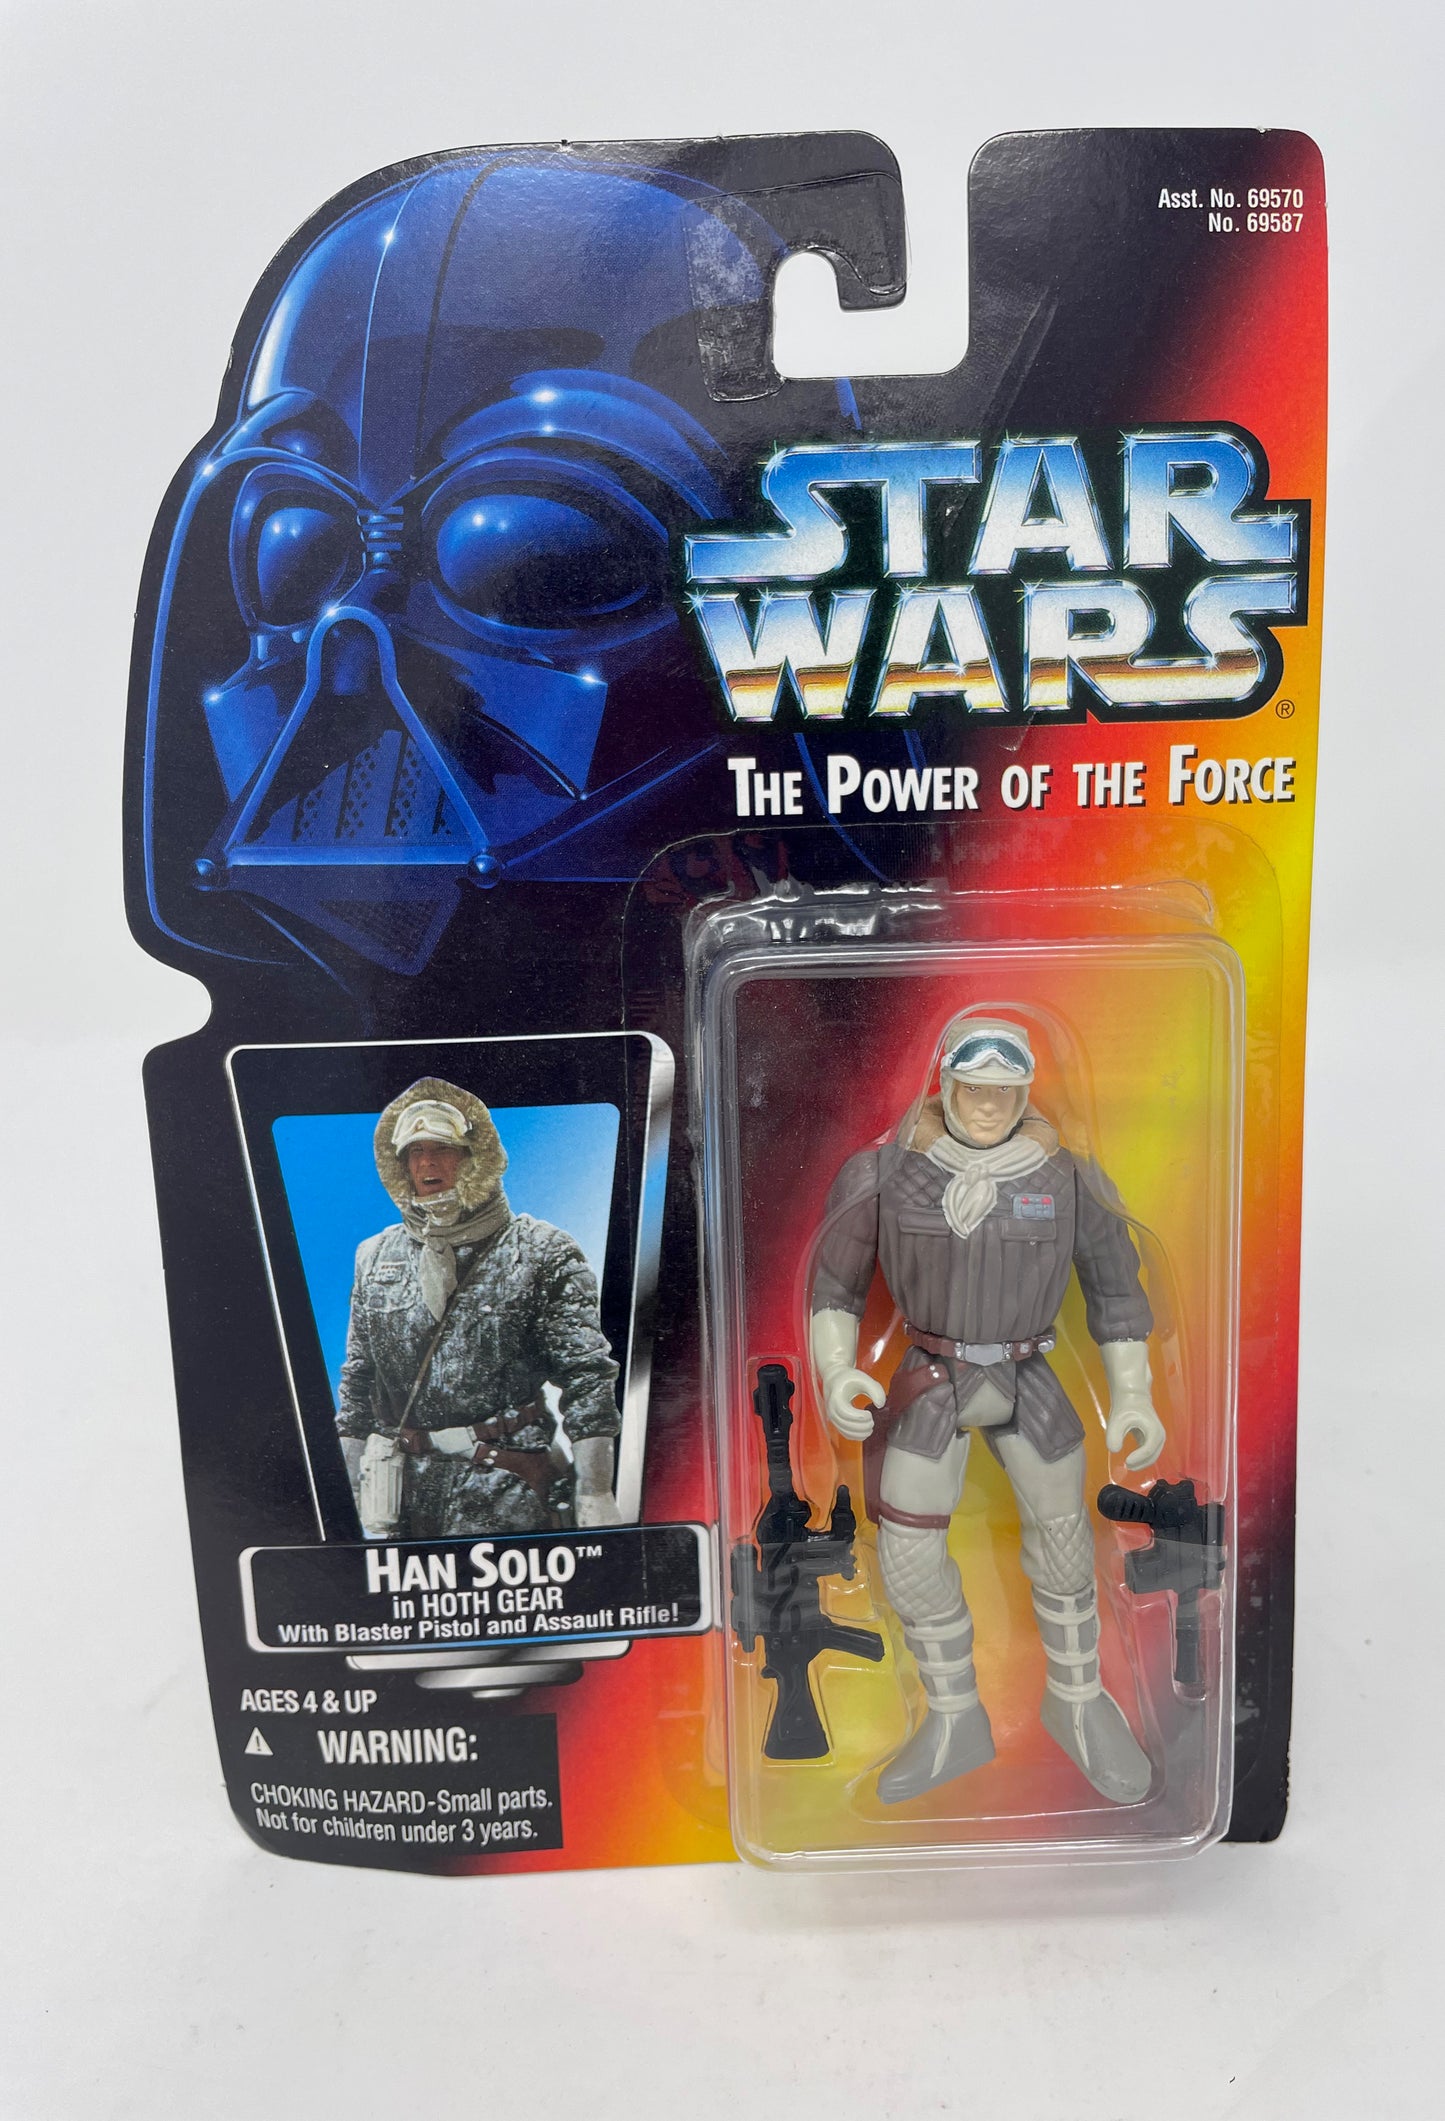 HANS SOLO IN HOTH GEAR - STAR WARS - THE POWER OF THE FORCE - 1995 KENNER/HASBRO